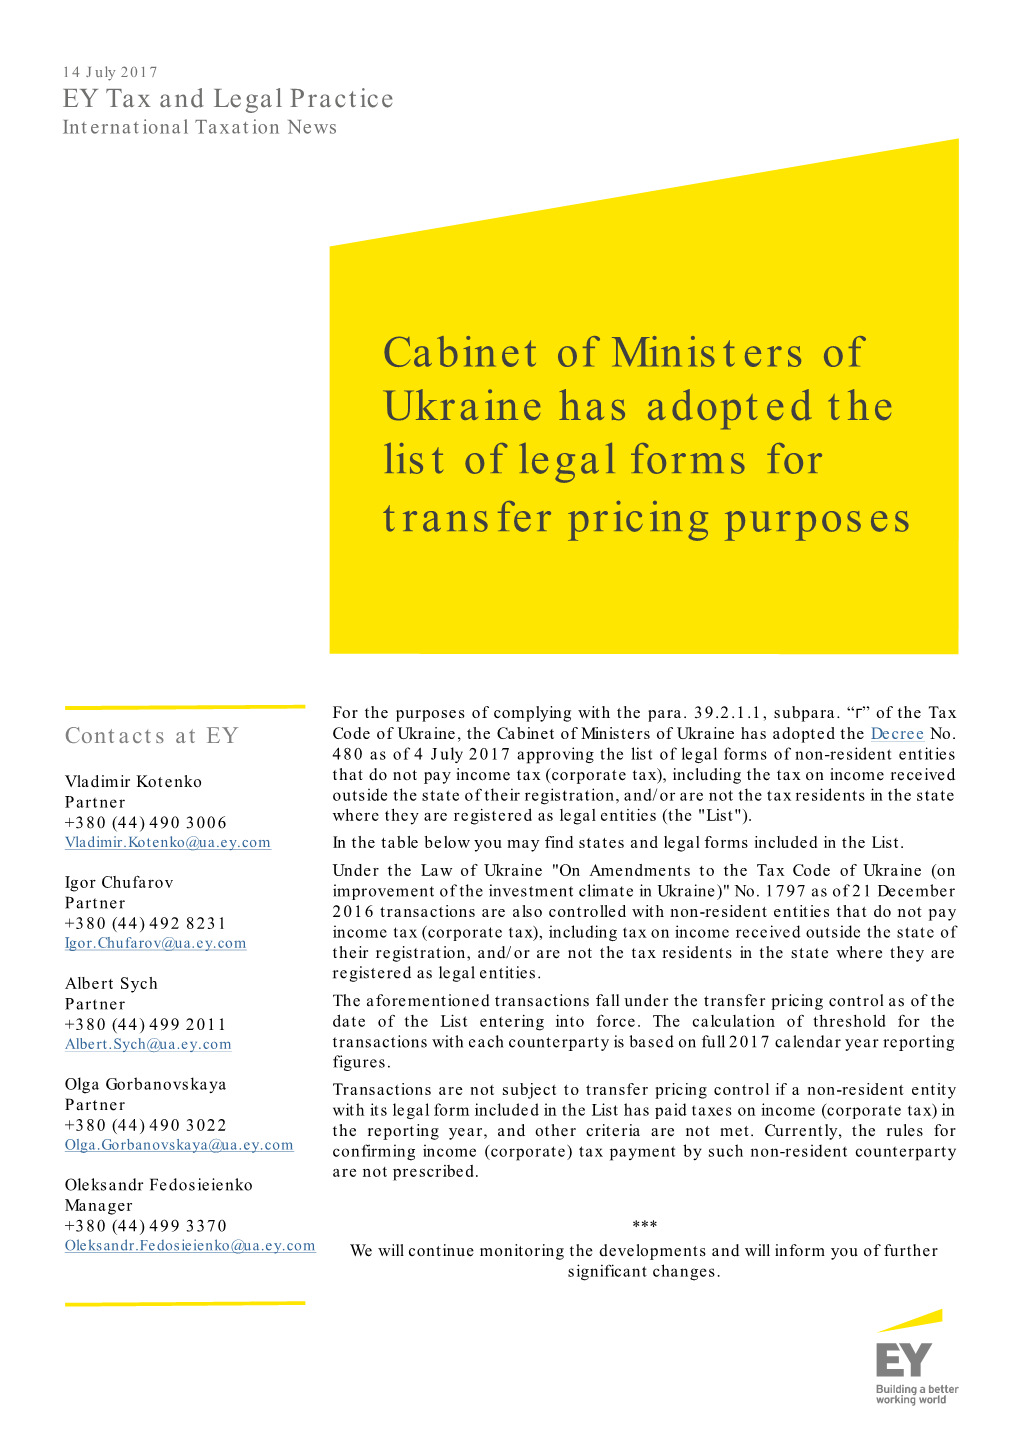 Cabinet of Ministers of Ukraine Has Adopted the List of Legal Forms for Transfer Pricing Purposes